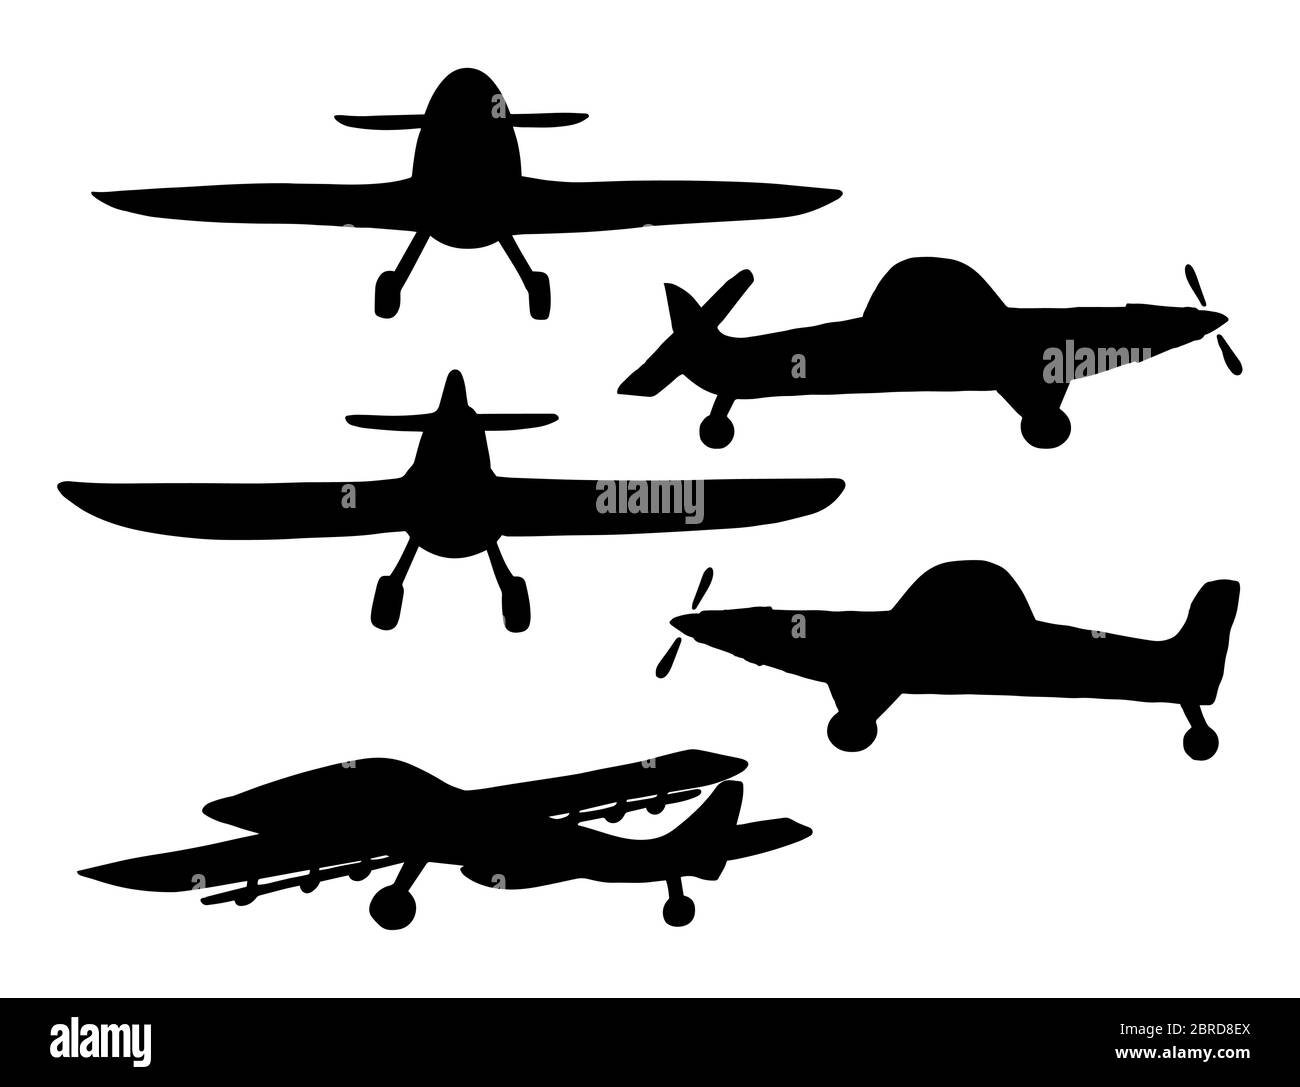 Set silhouette Airplane in doodle style isolated on white background. Set of agricultural aircraft vector outline icons for kids playing, web design, Stock Vector